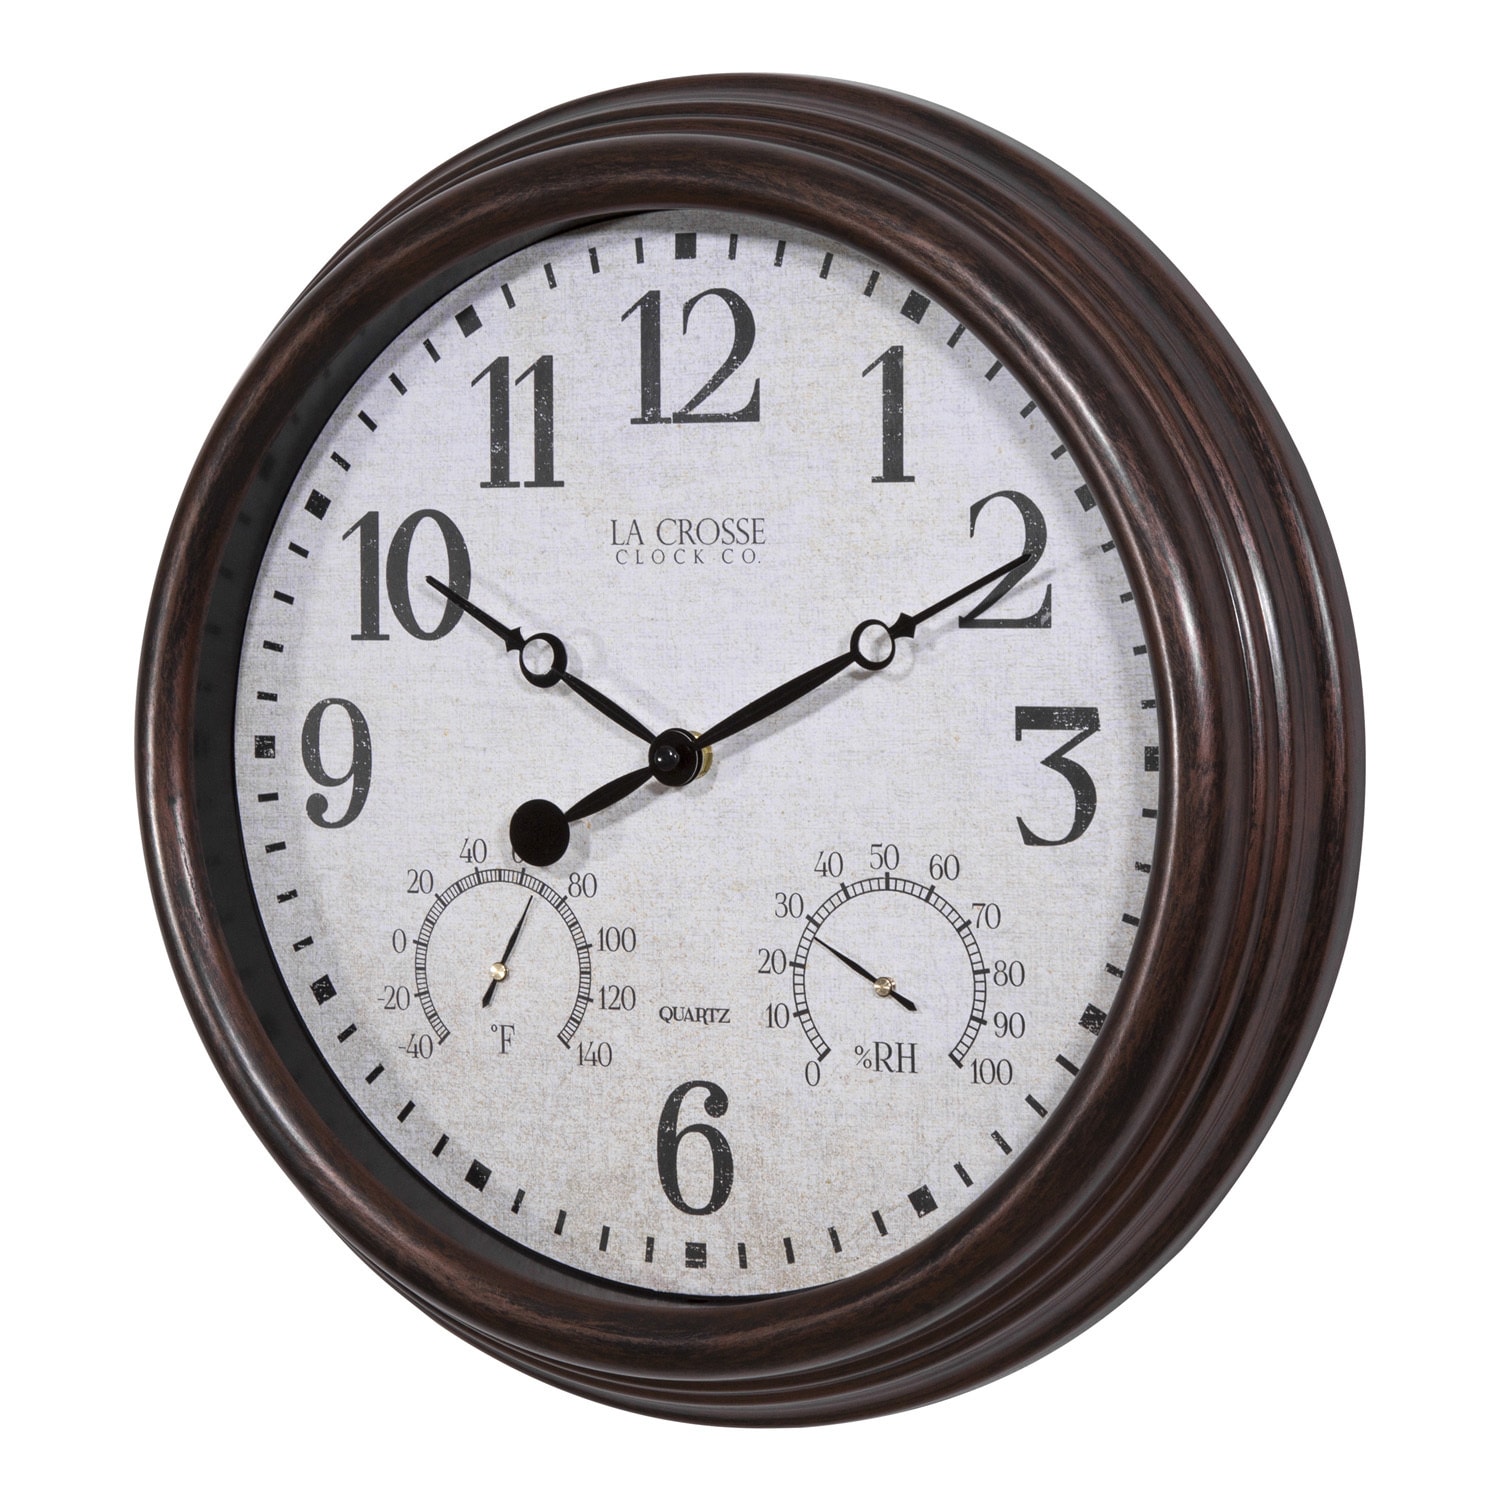 https://ak1.ostkcdn.com/images/products/17994681/La-Crosse-Clock-404-3015-15-Inch-Indoor-Outdoor-Wall-Clock-with-Temperature-and-Humidity-6d167978-cfe7-4157-bbb3-f7ff04b99829.jpg